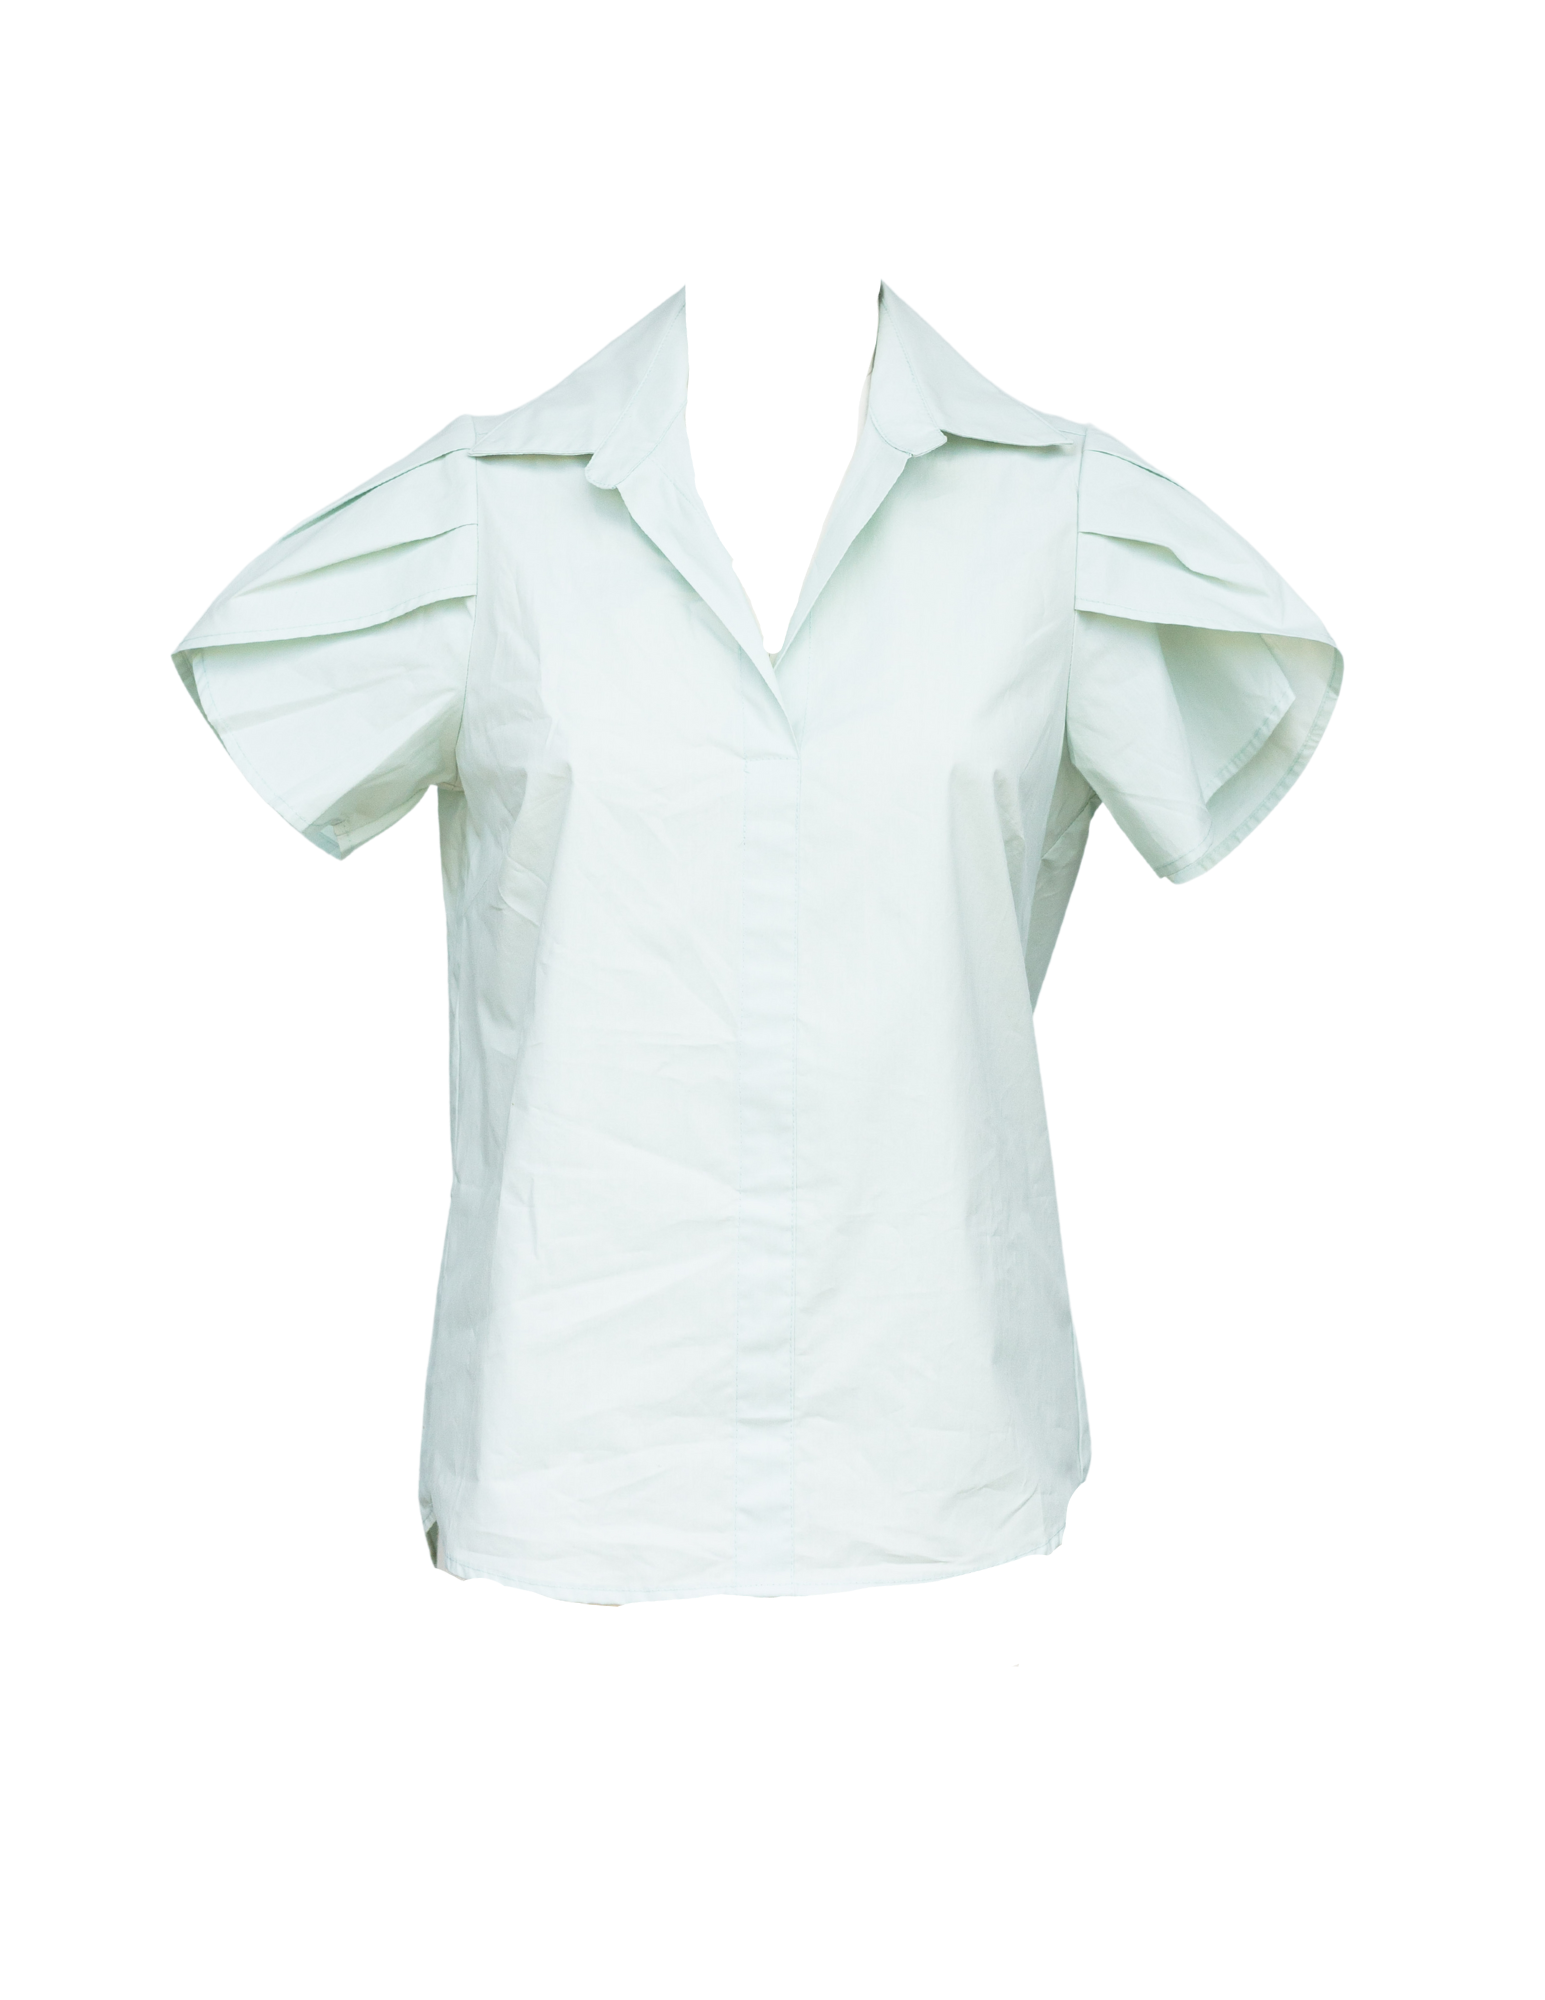 Beth Top - Mint Voile